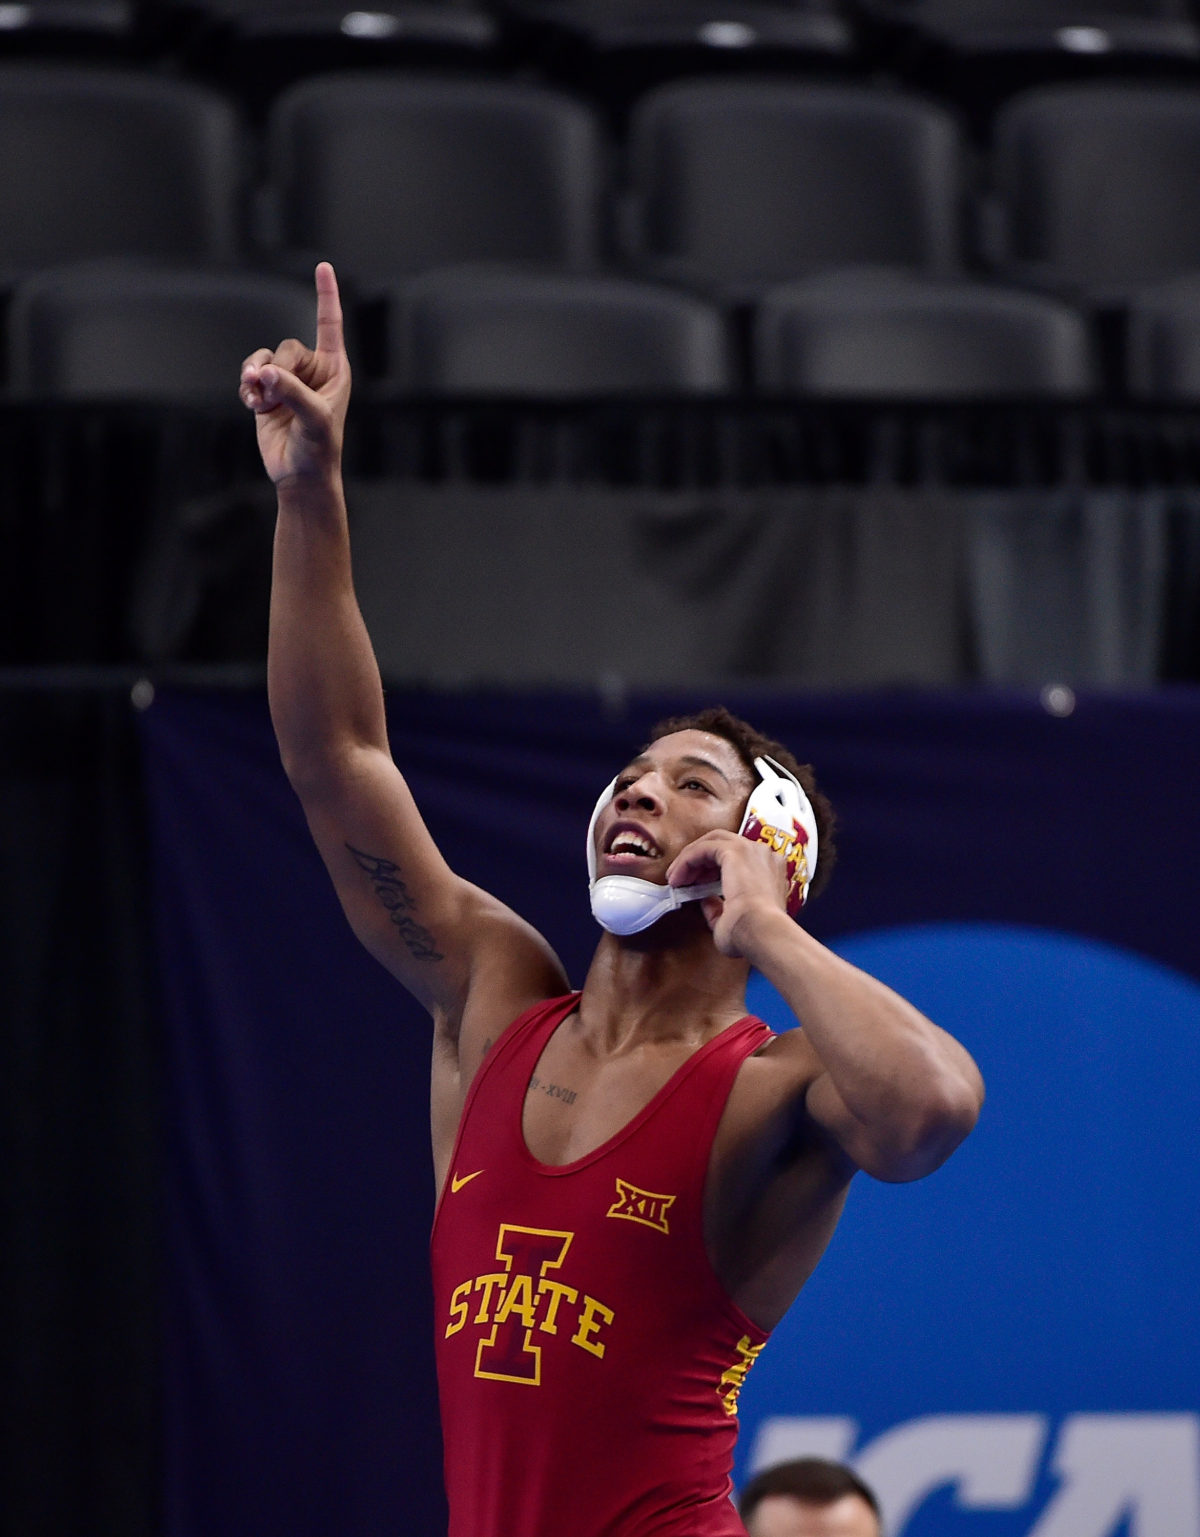 Iowa State's David Carr will wrestle for an NCAA title at 165lbs